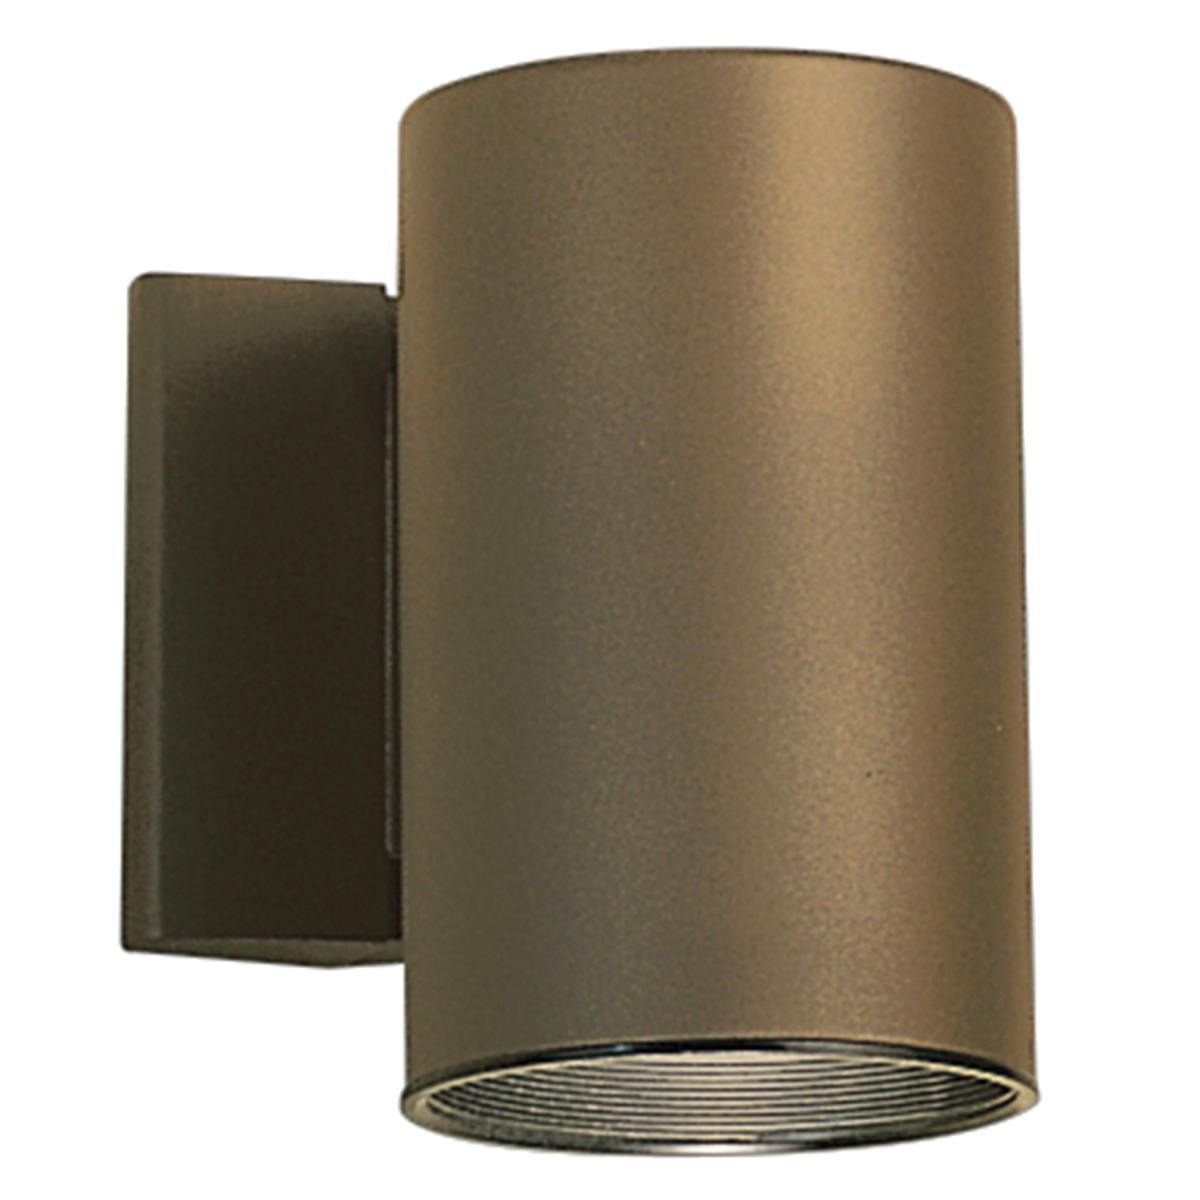 Cylinder 7" 1 Light Wall Light Bronze on a white background